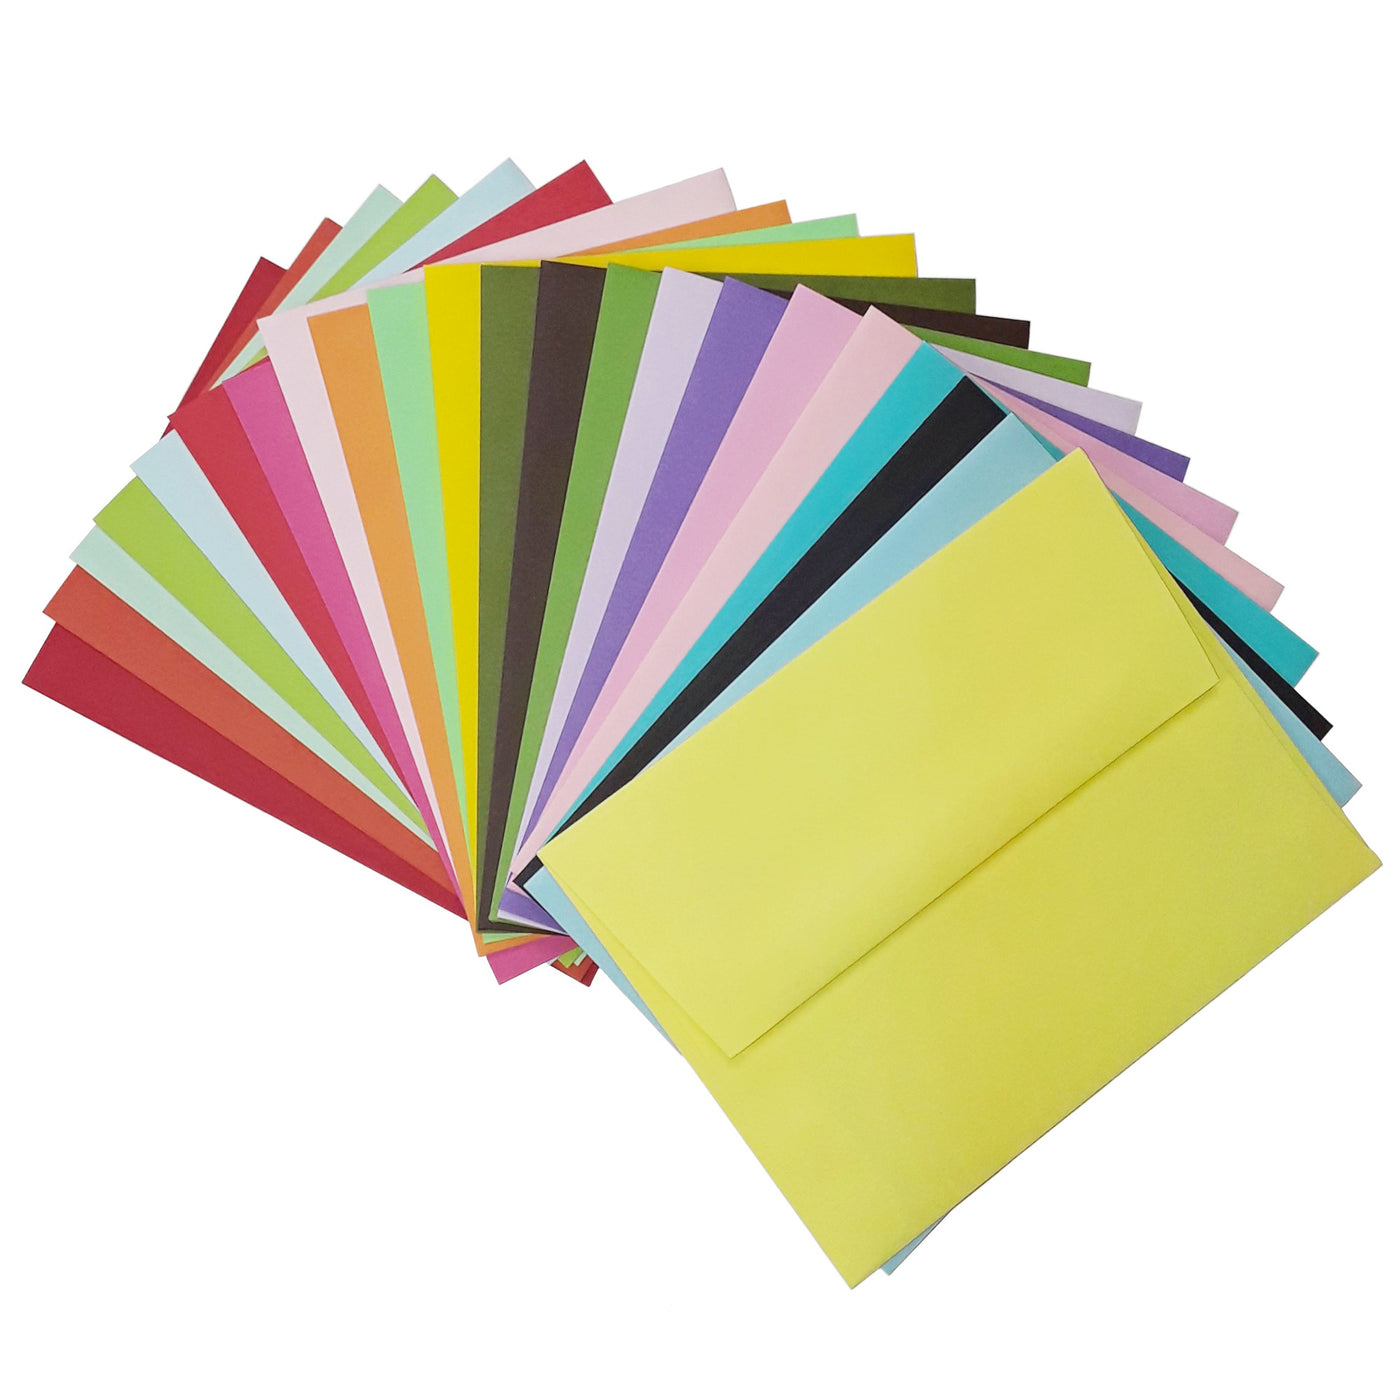 Pack of all 22 colors of Pop-Tone A2 envelopes